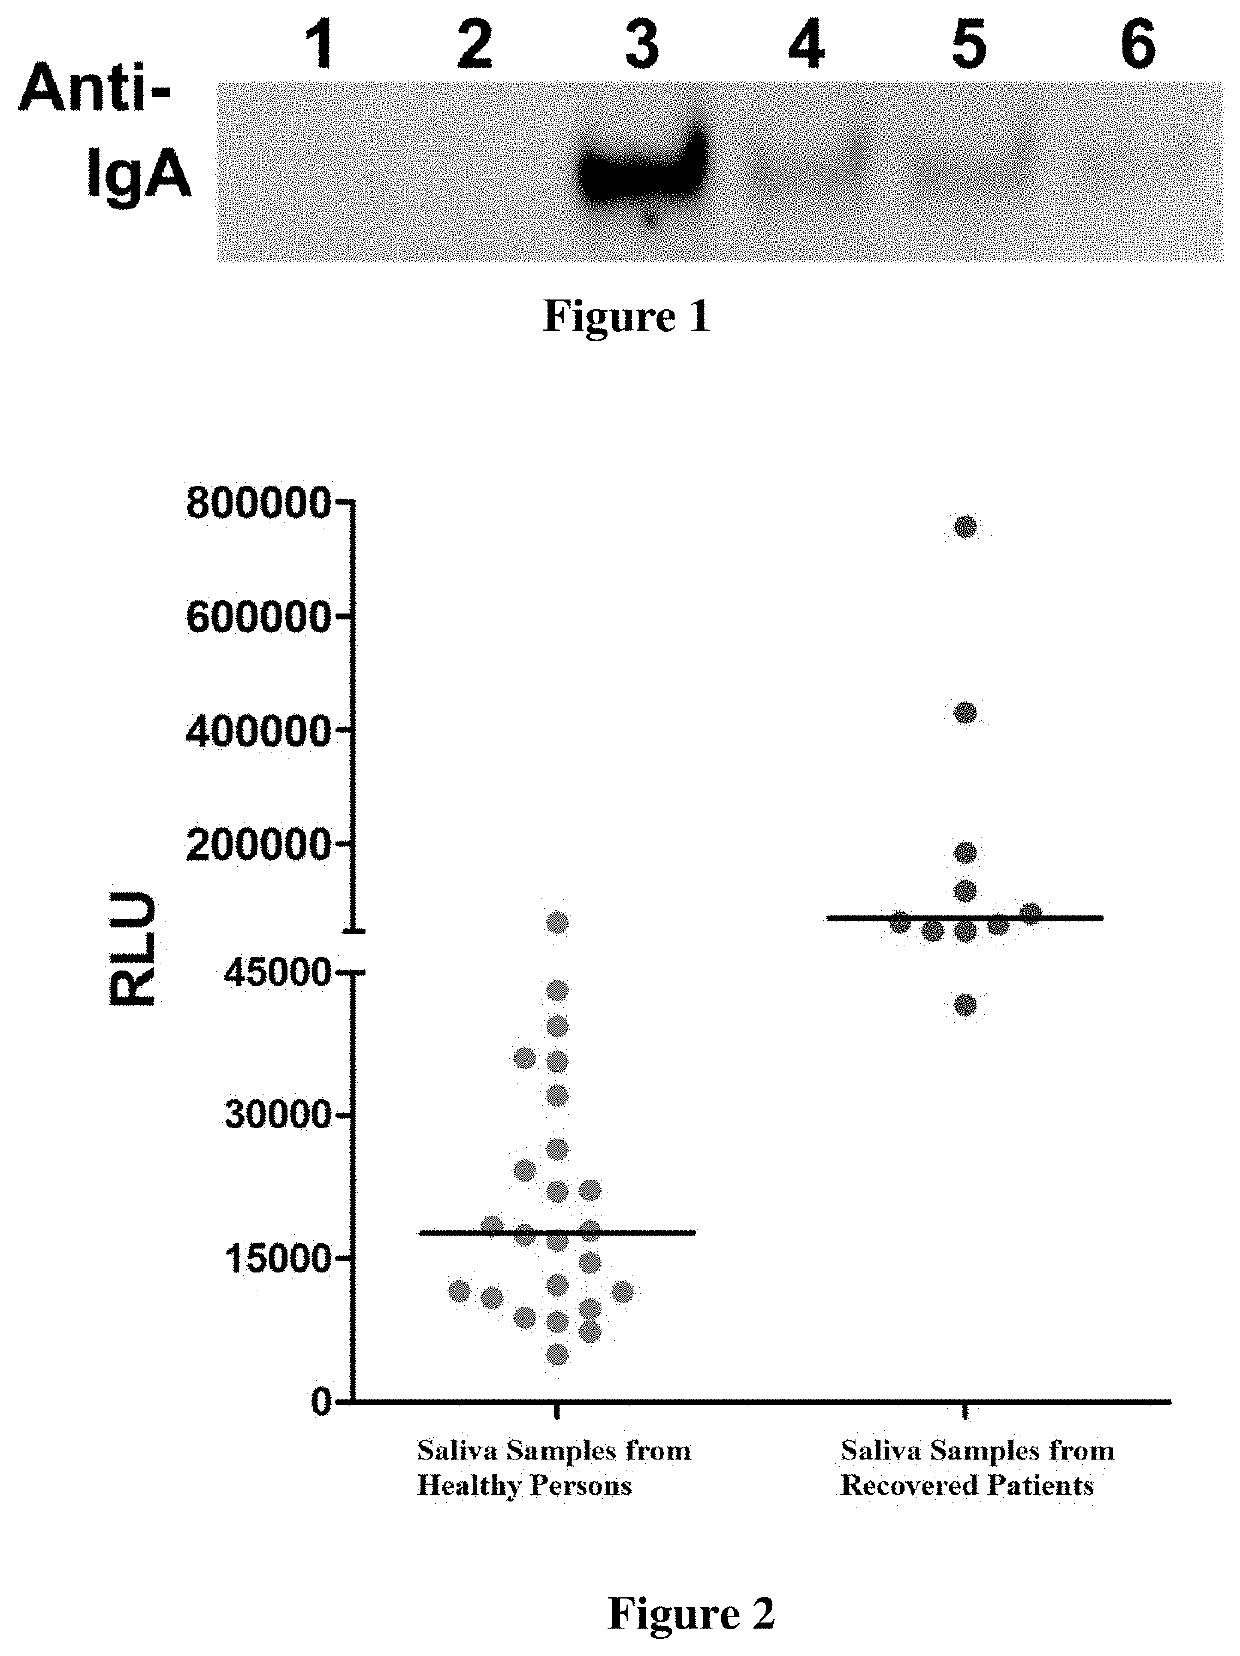 Method for diagnosing sars-cov-2 infection